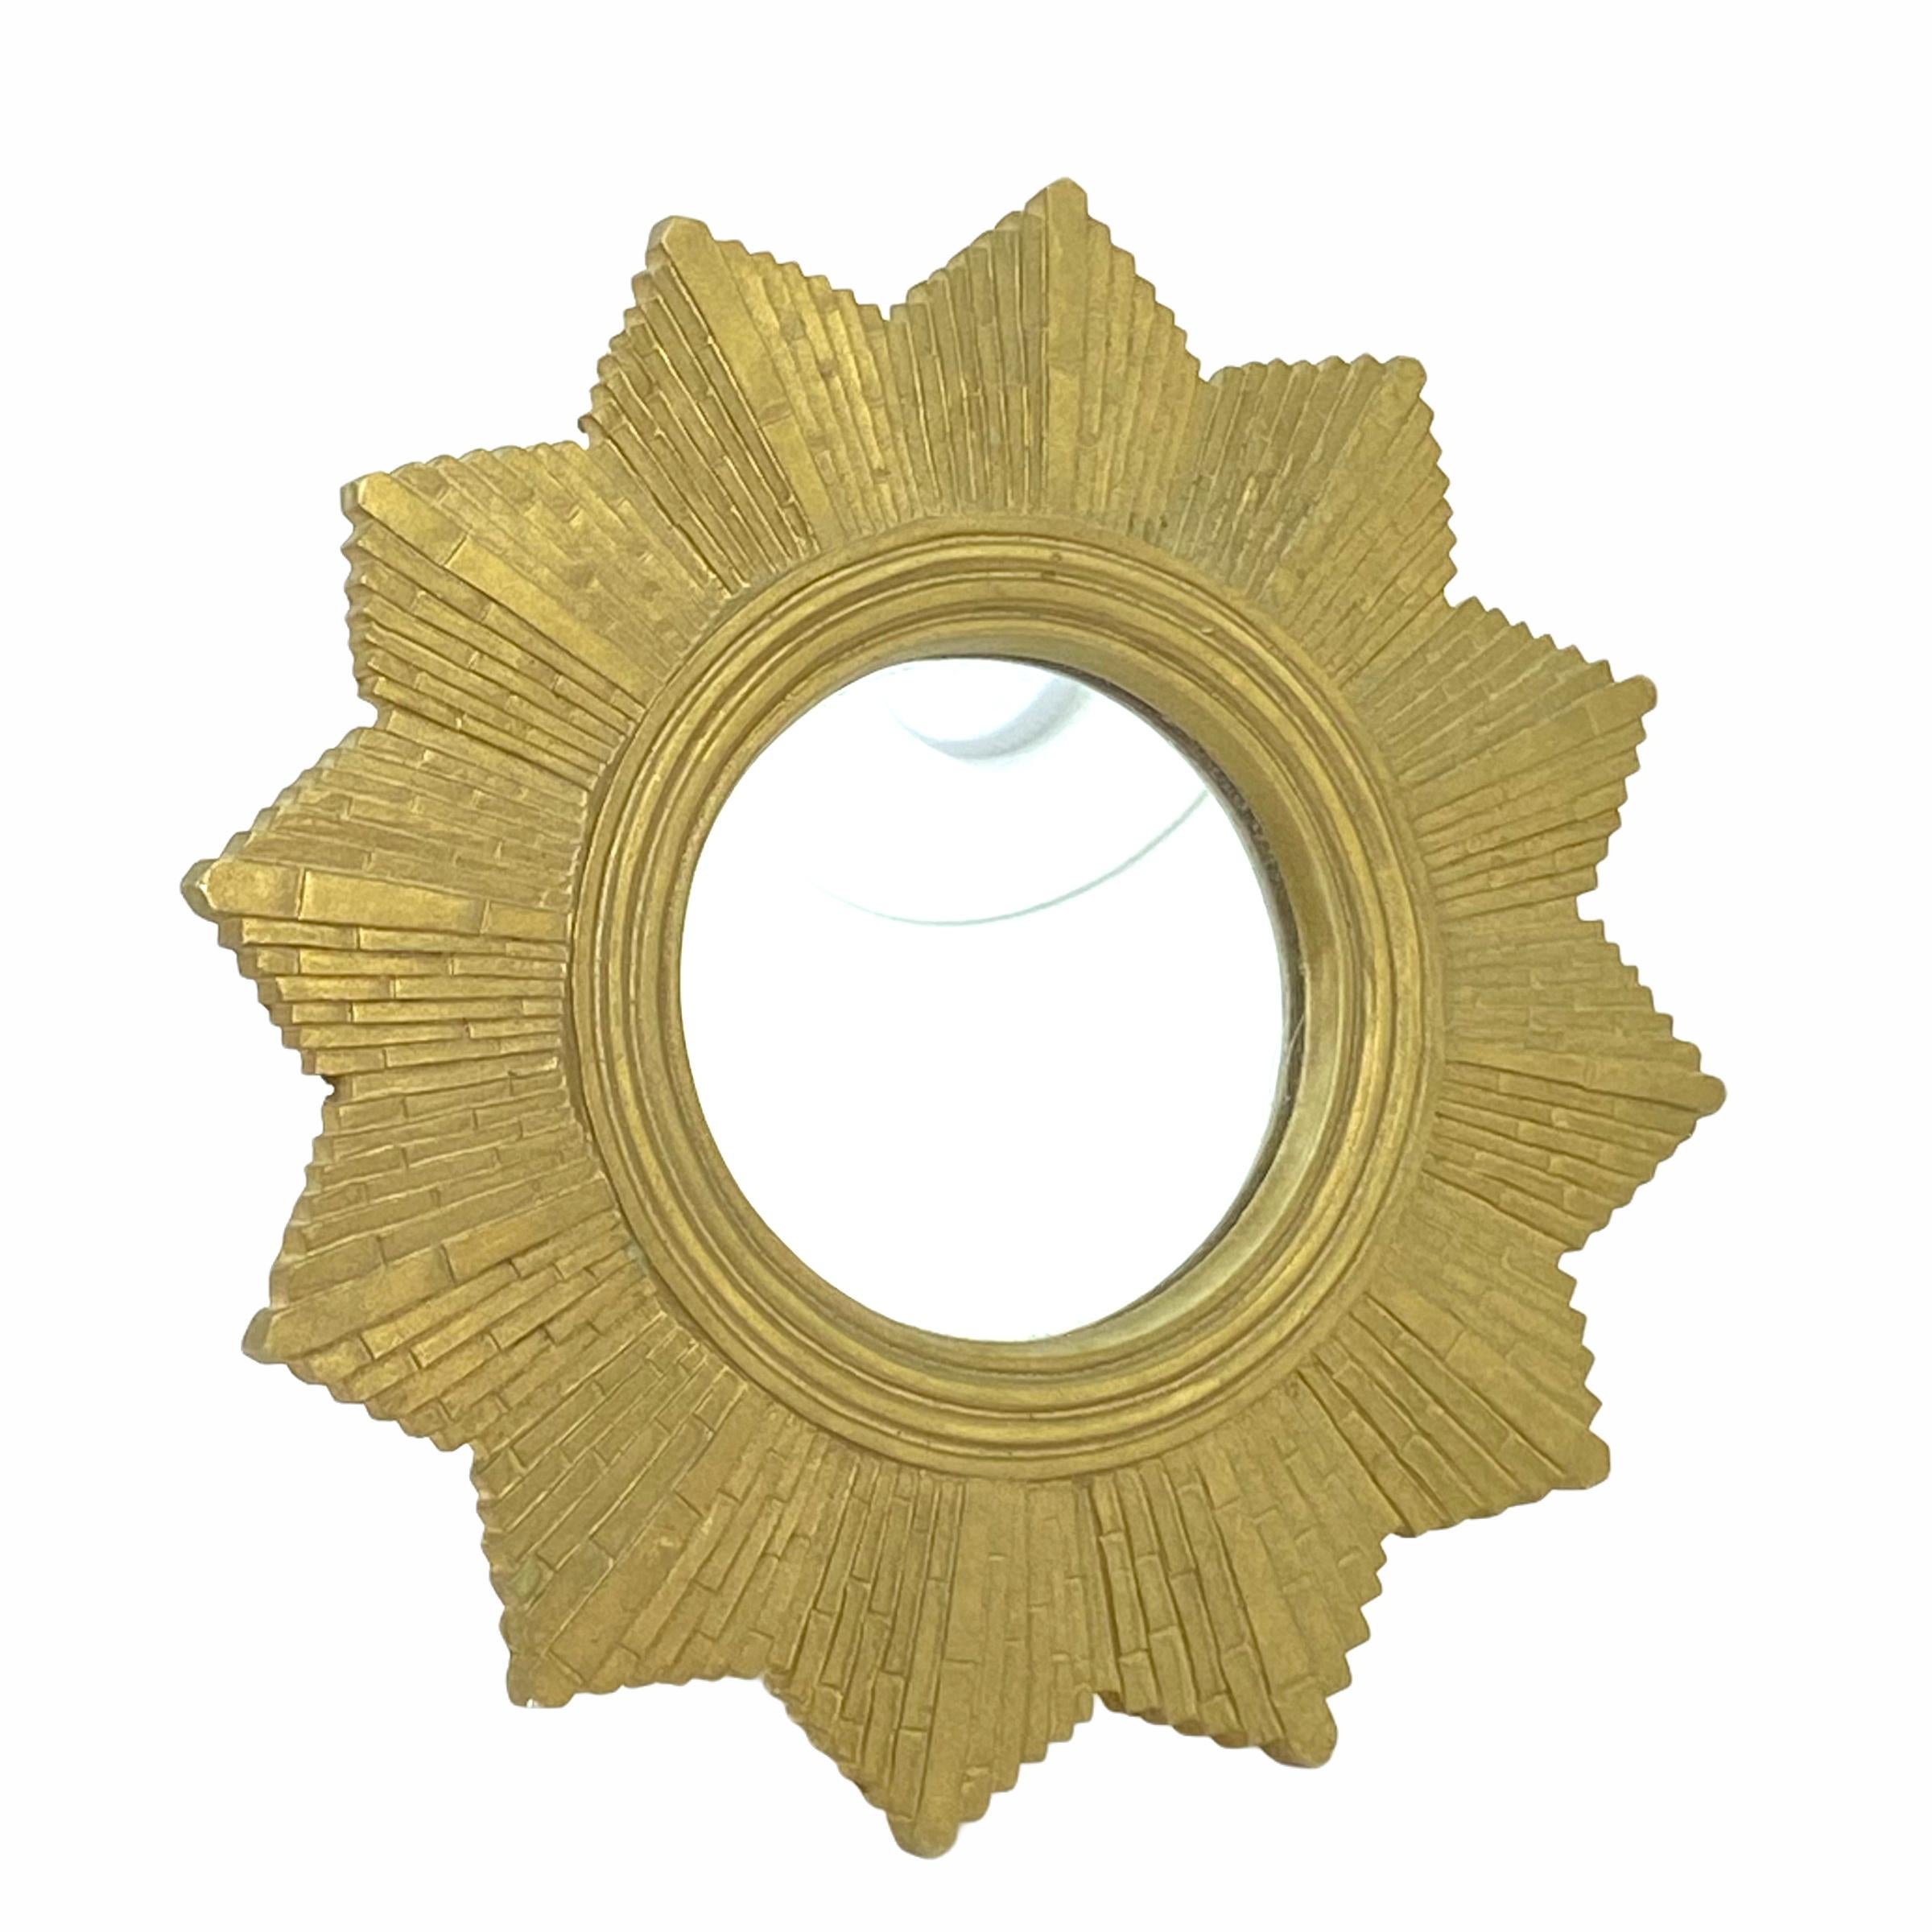 A cute sunburst or starburst mirror. Made of gilded composition. It measures approximate: 7 1/8